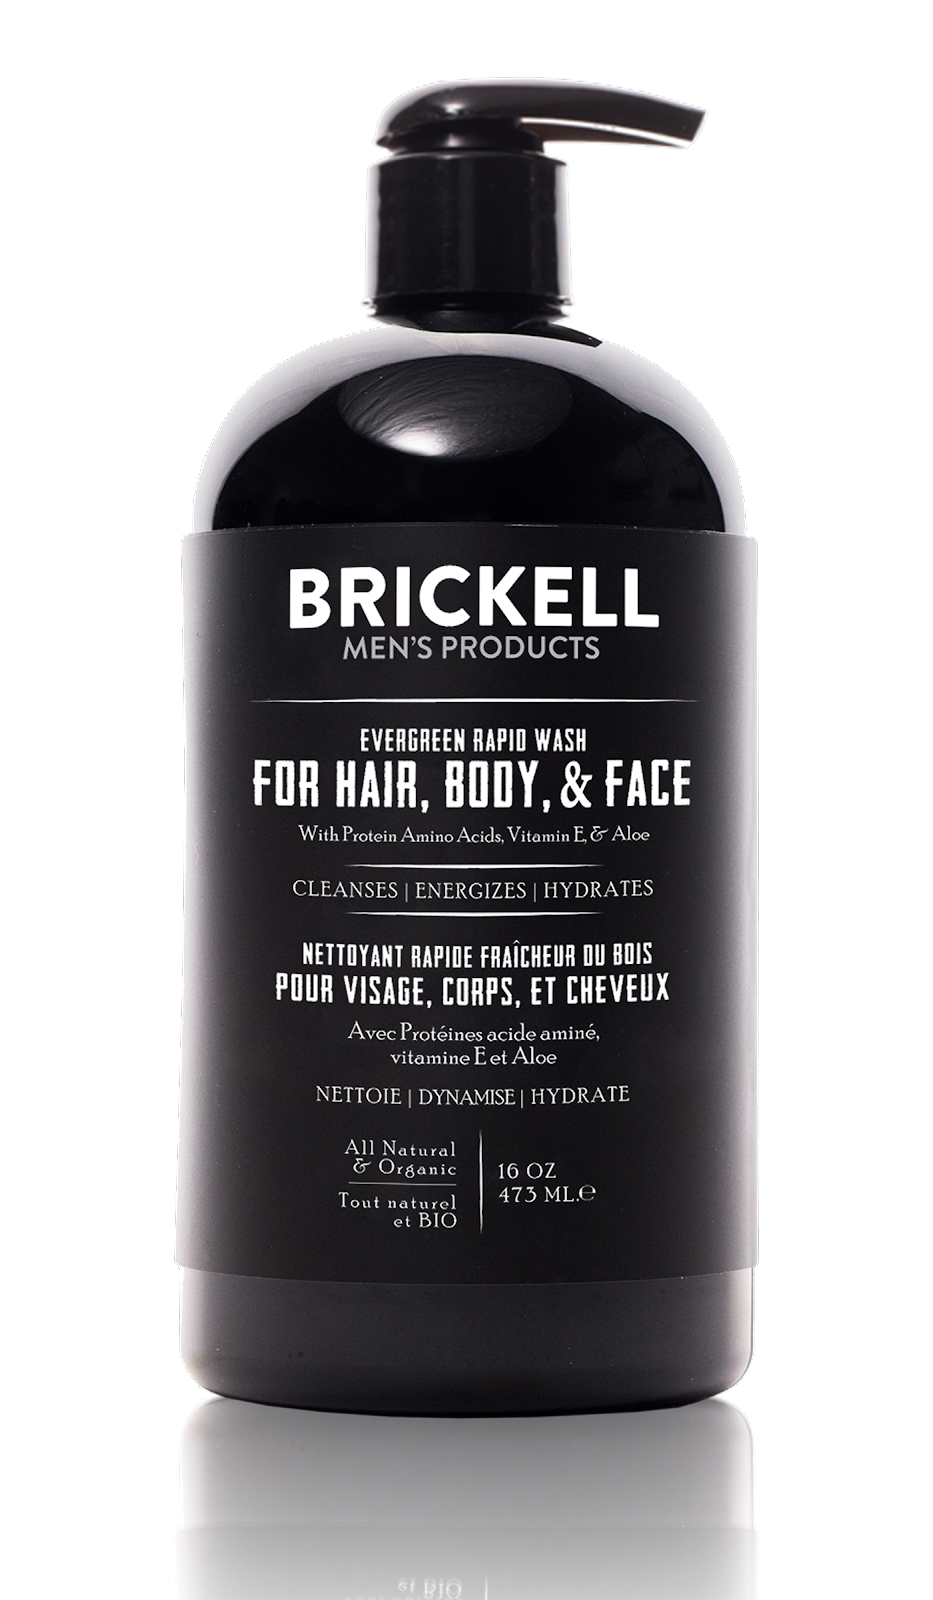 The Best Men's 3 in 1 Body Wash - All in One | Brickell Men's Products ...